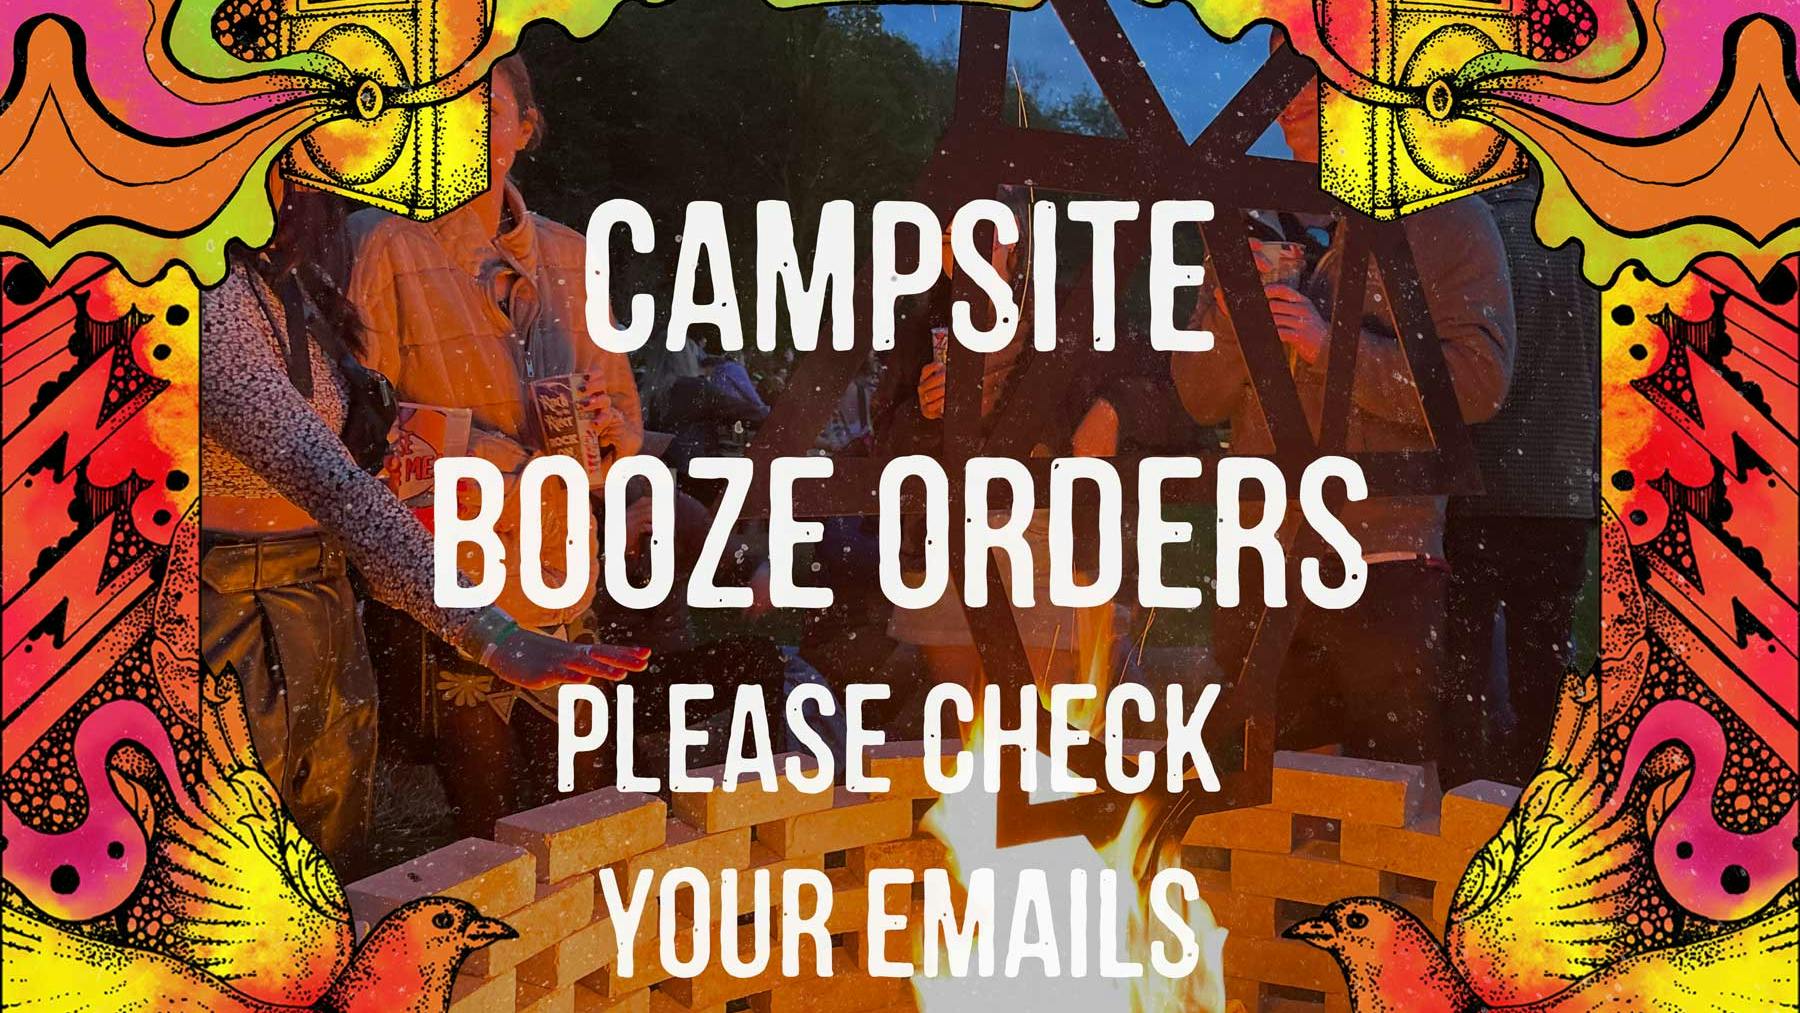 Attention all campers, you’ve got mail!